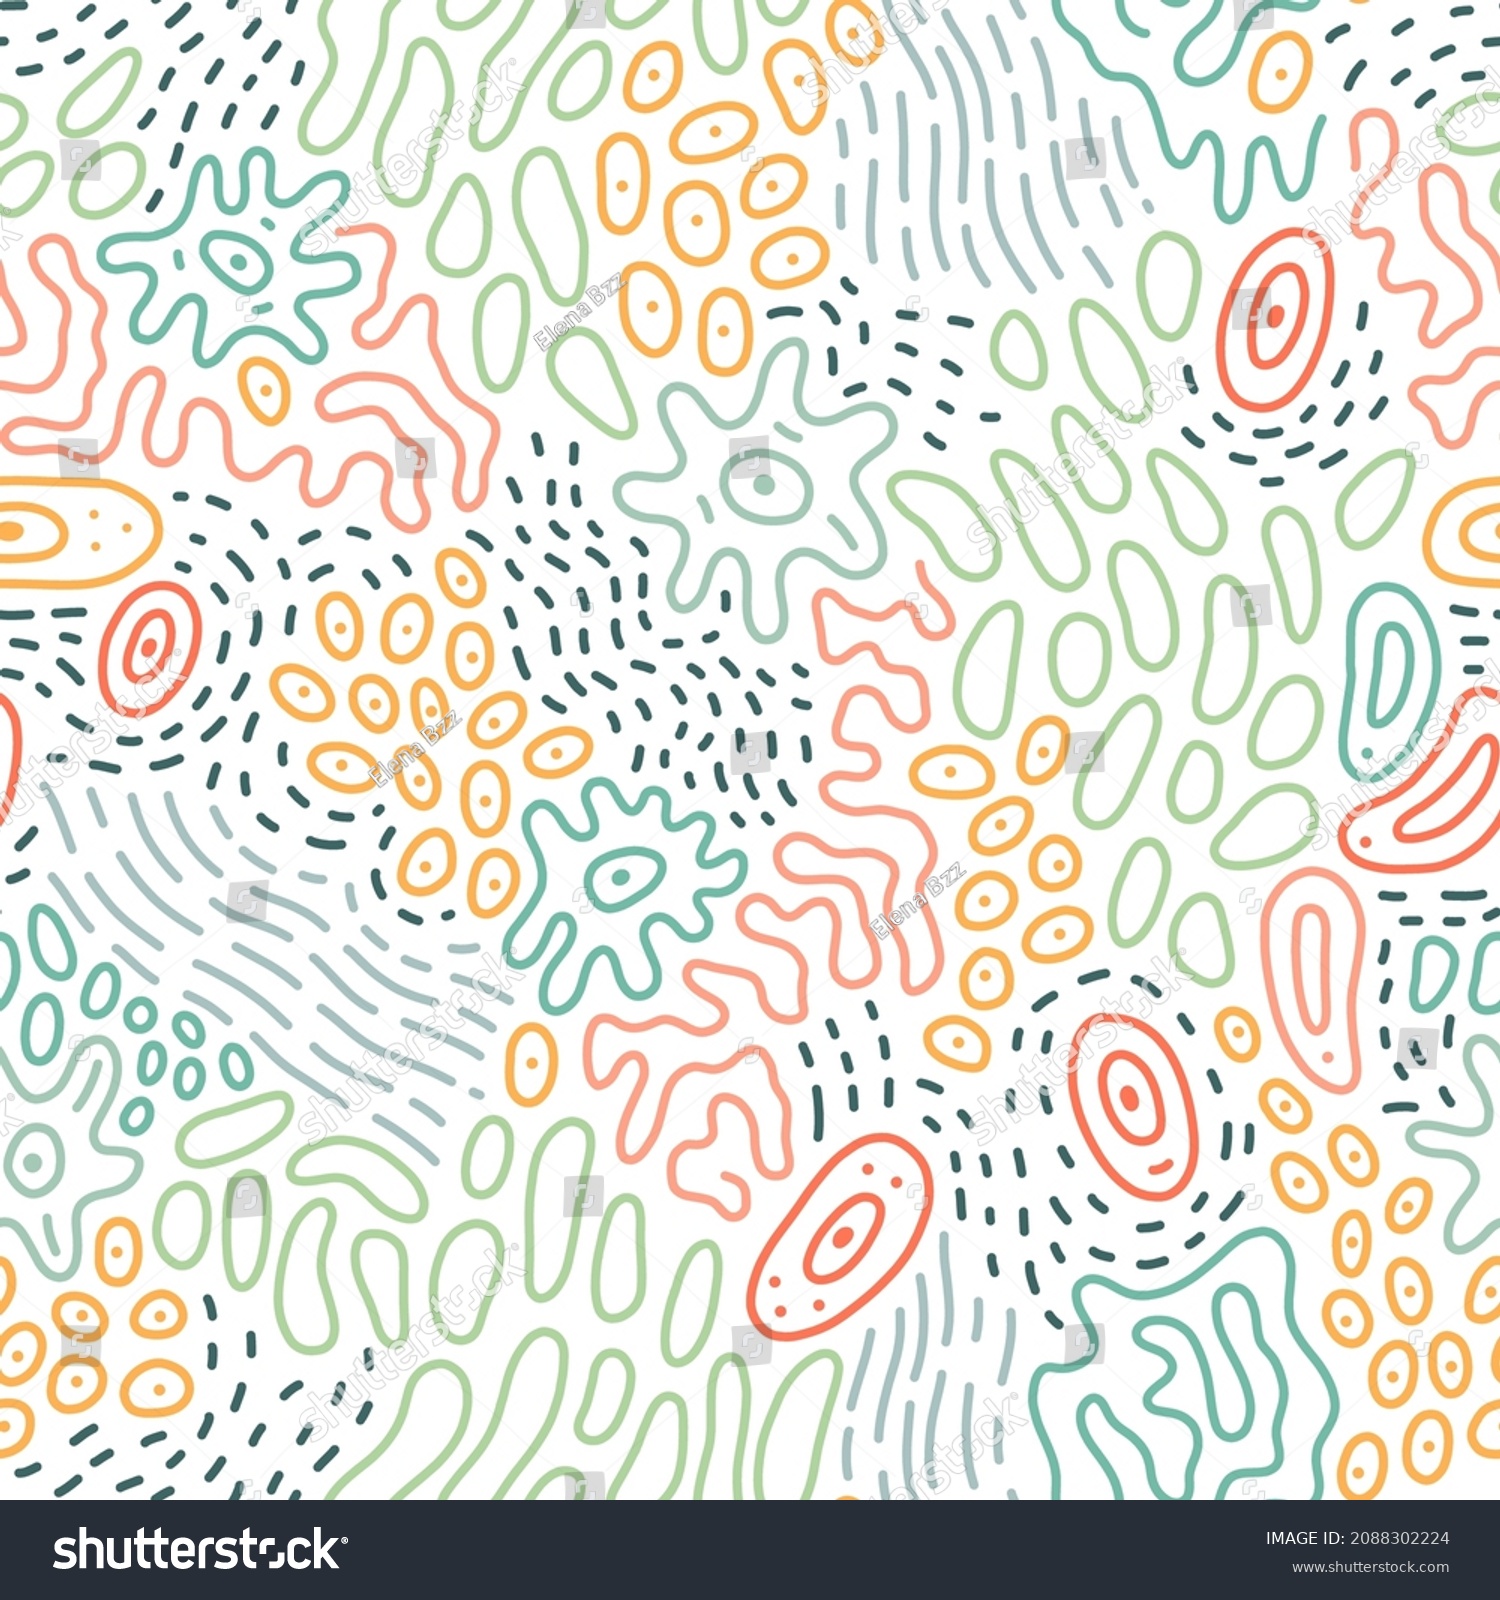 SVG of Abstract doodle pattern with microbe, virus, bacteria. Vector seamless background with fantasy microorganism, mold, cell, germ, probiotic etc.  svg